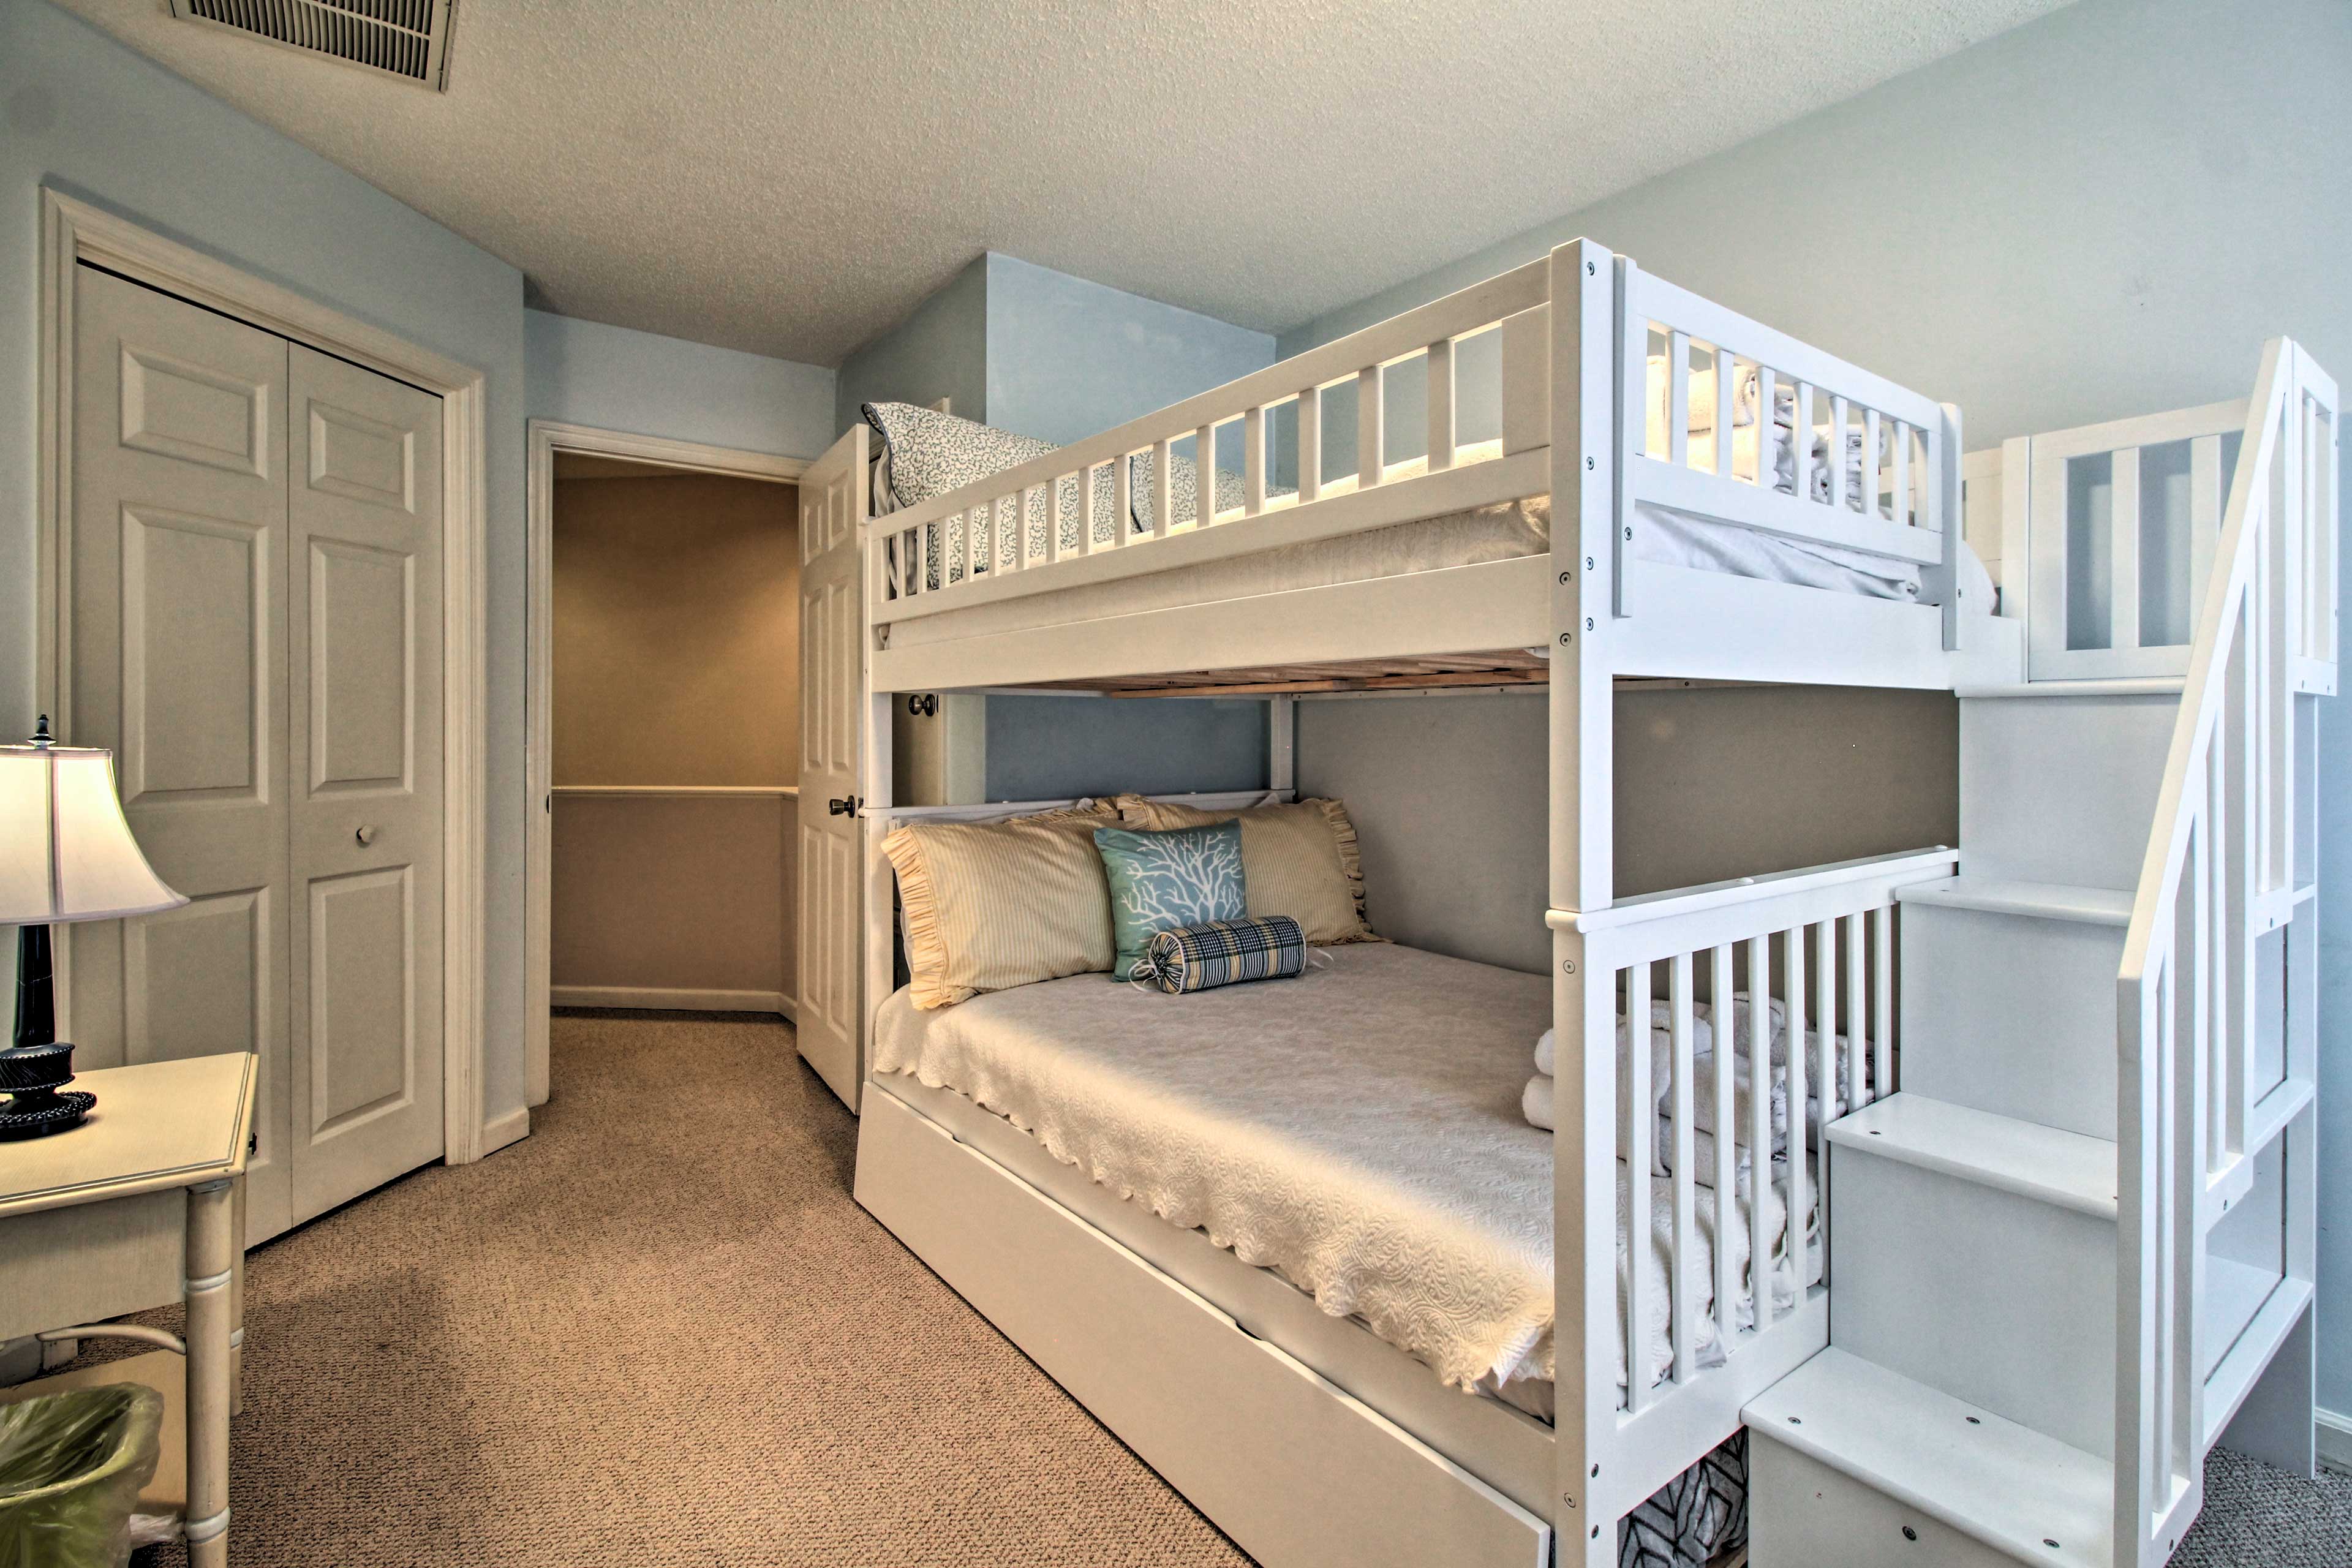 Climb up into the bunk bed and enjoy restful slumbers.